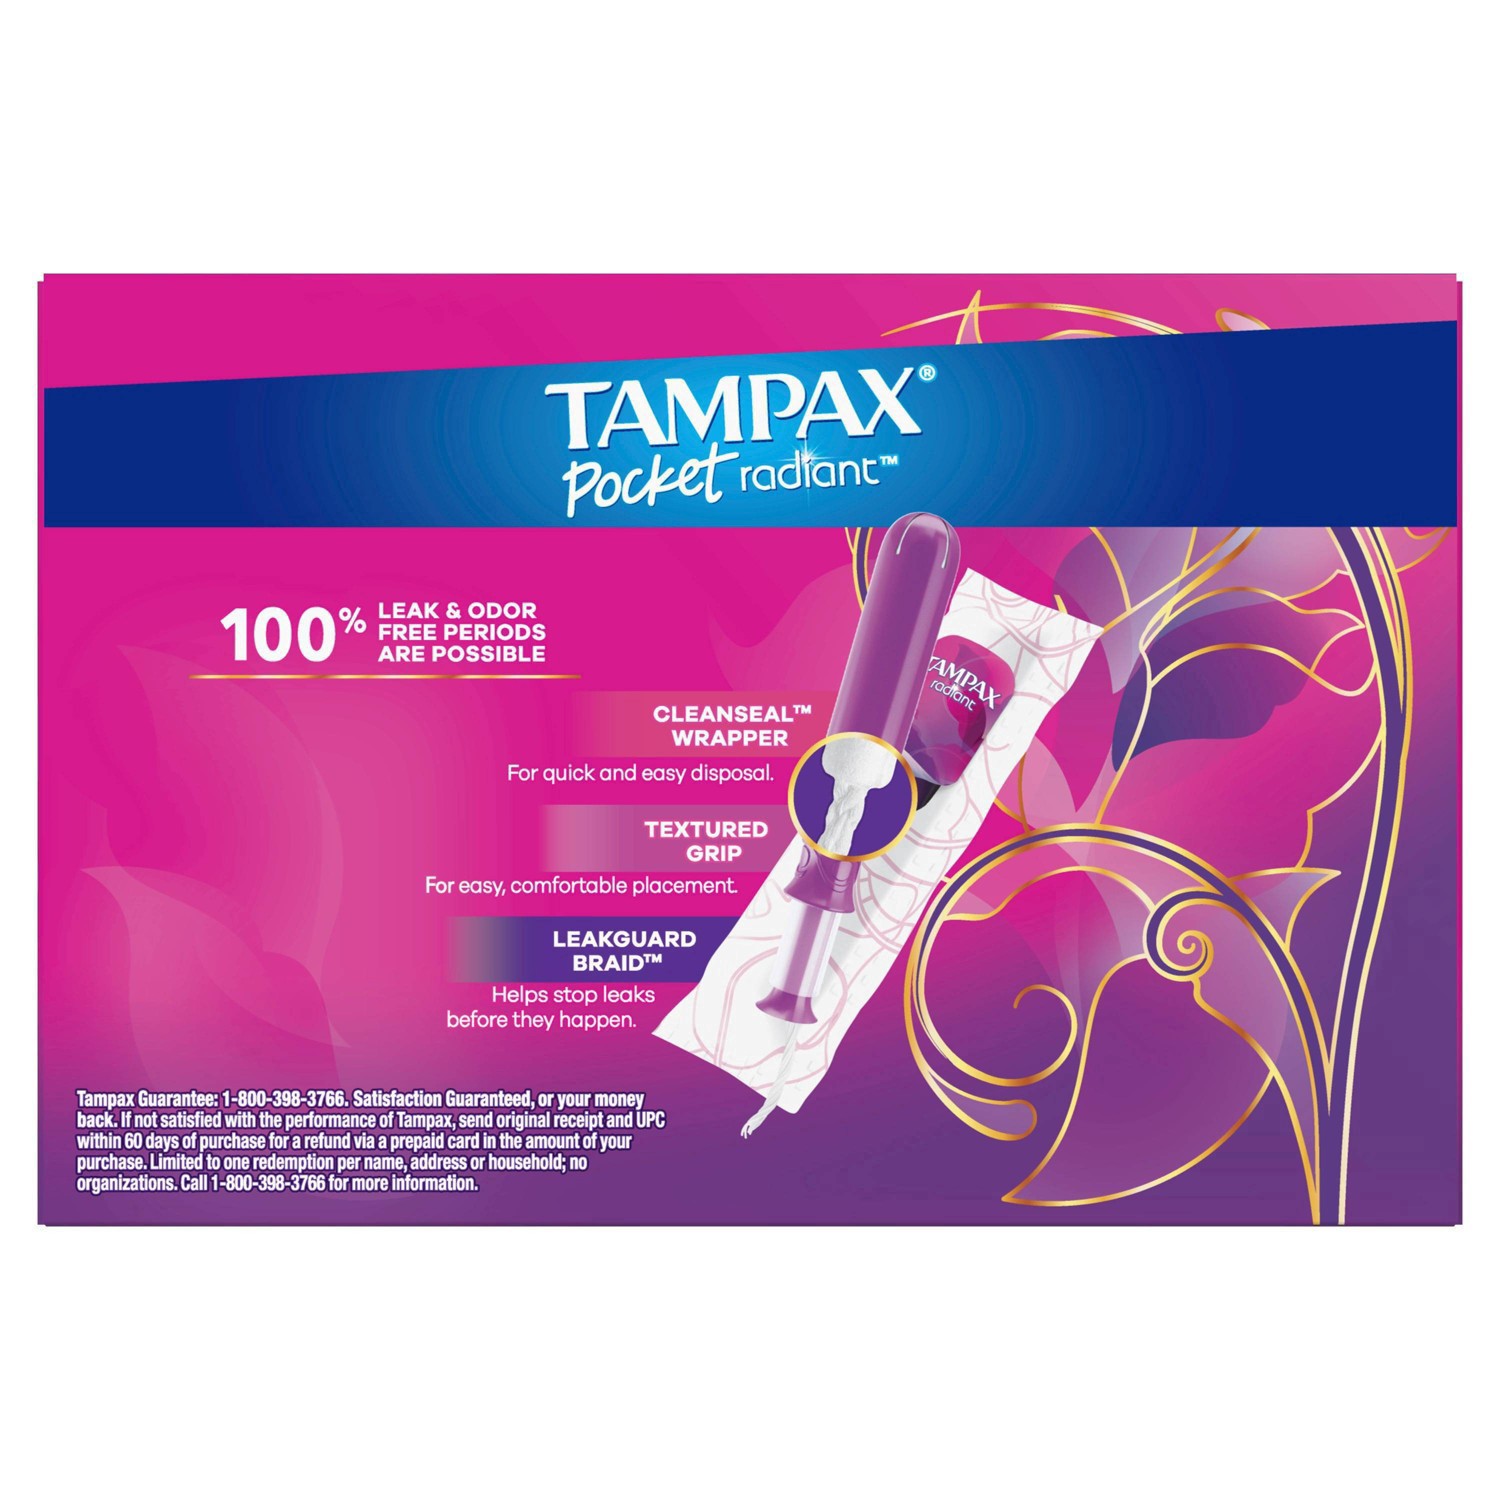 slide 39 of 94, Tampax Pocket Radiant Compact Plastic Tampons, With LeakGuard Braid, Super Absorbency, Unscented, 28 Count, 28 ct